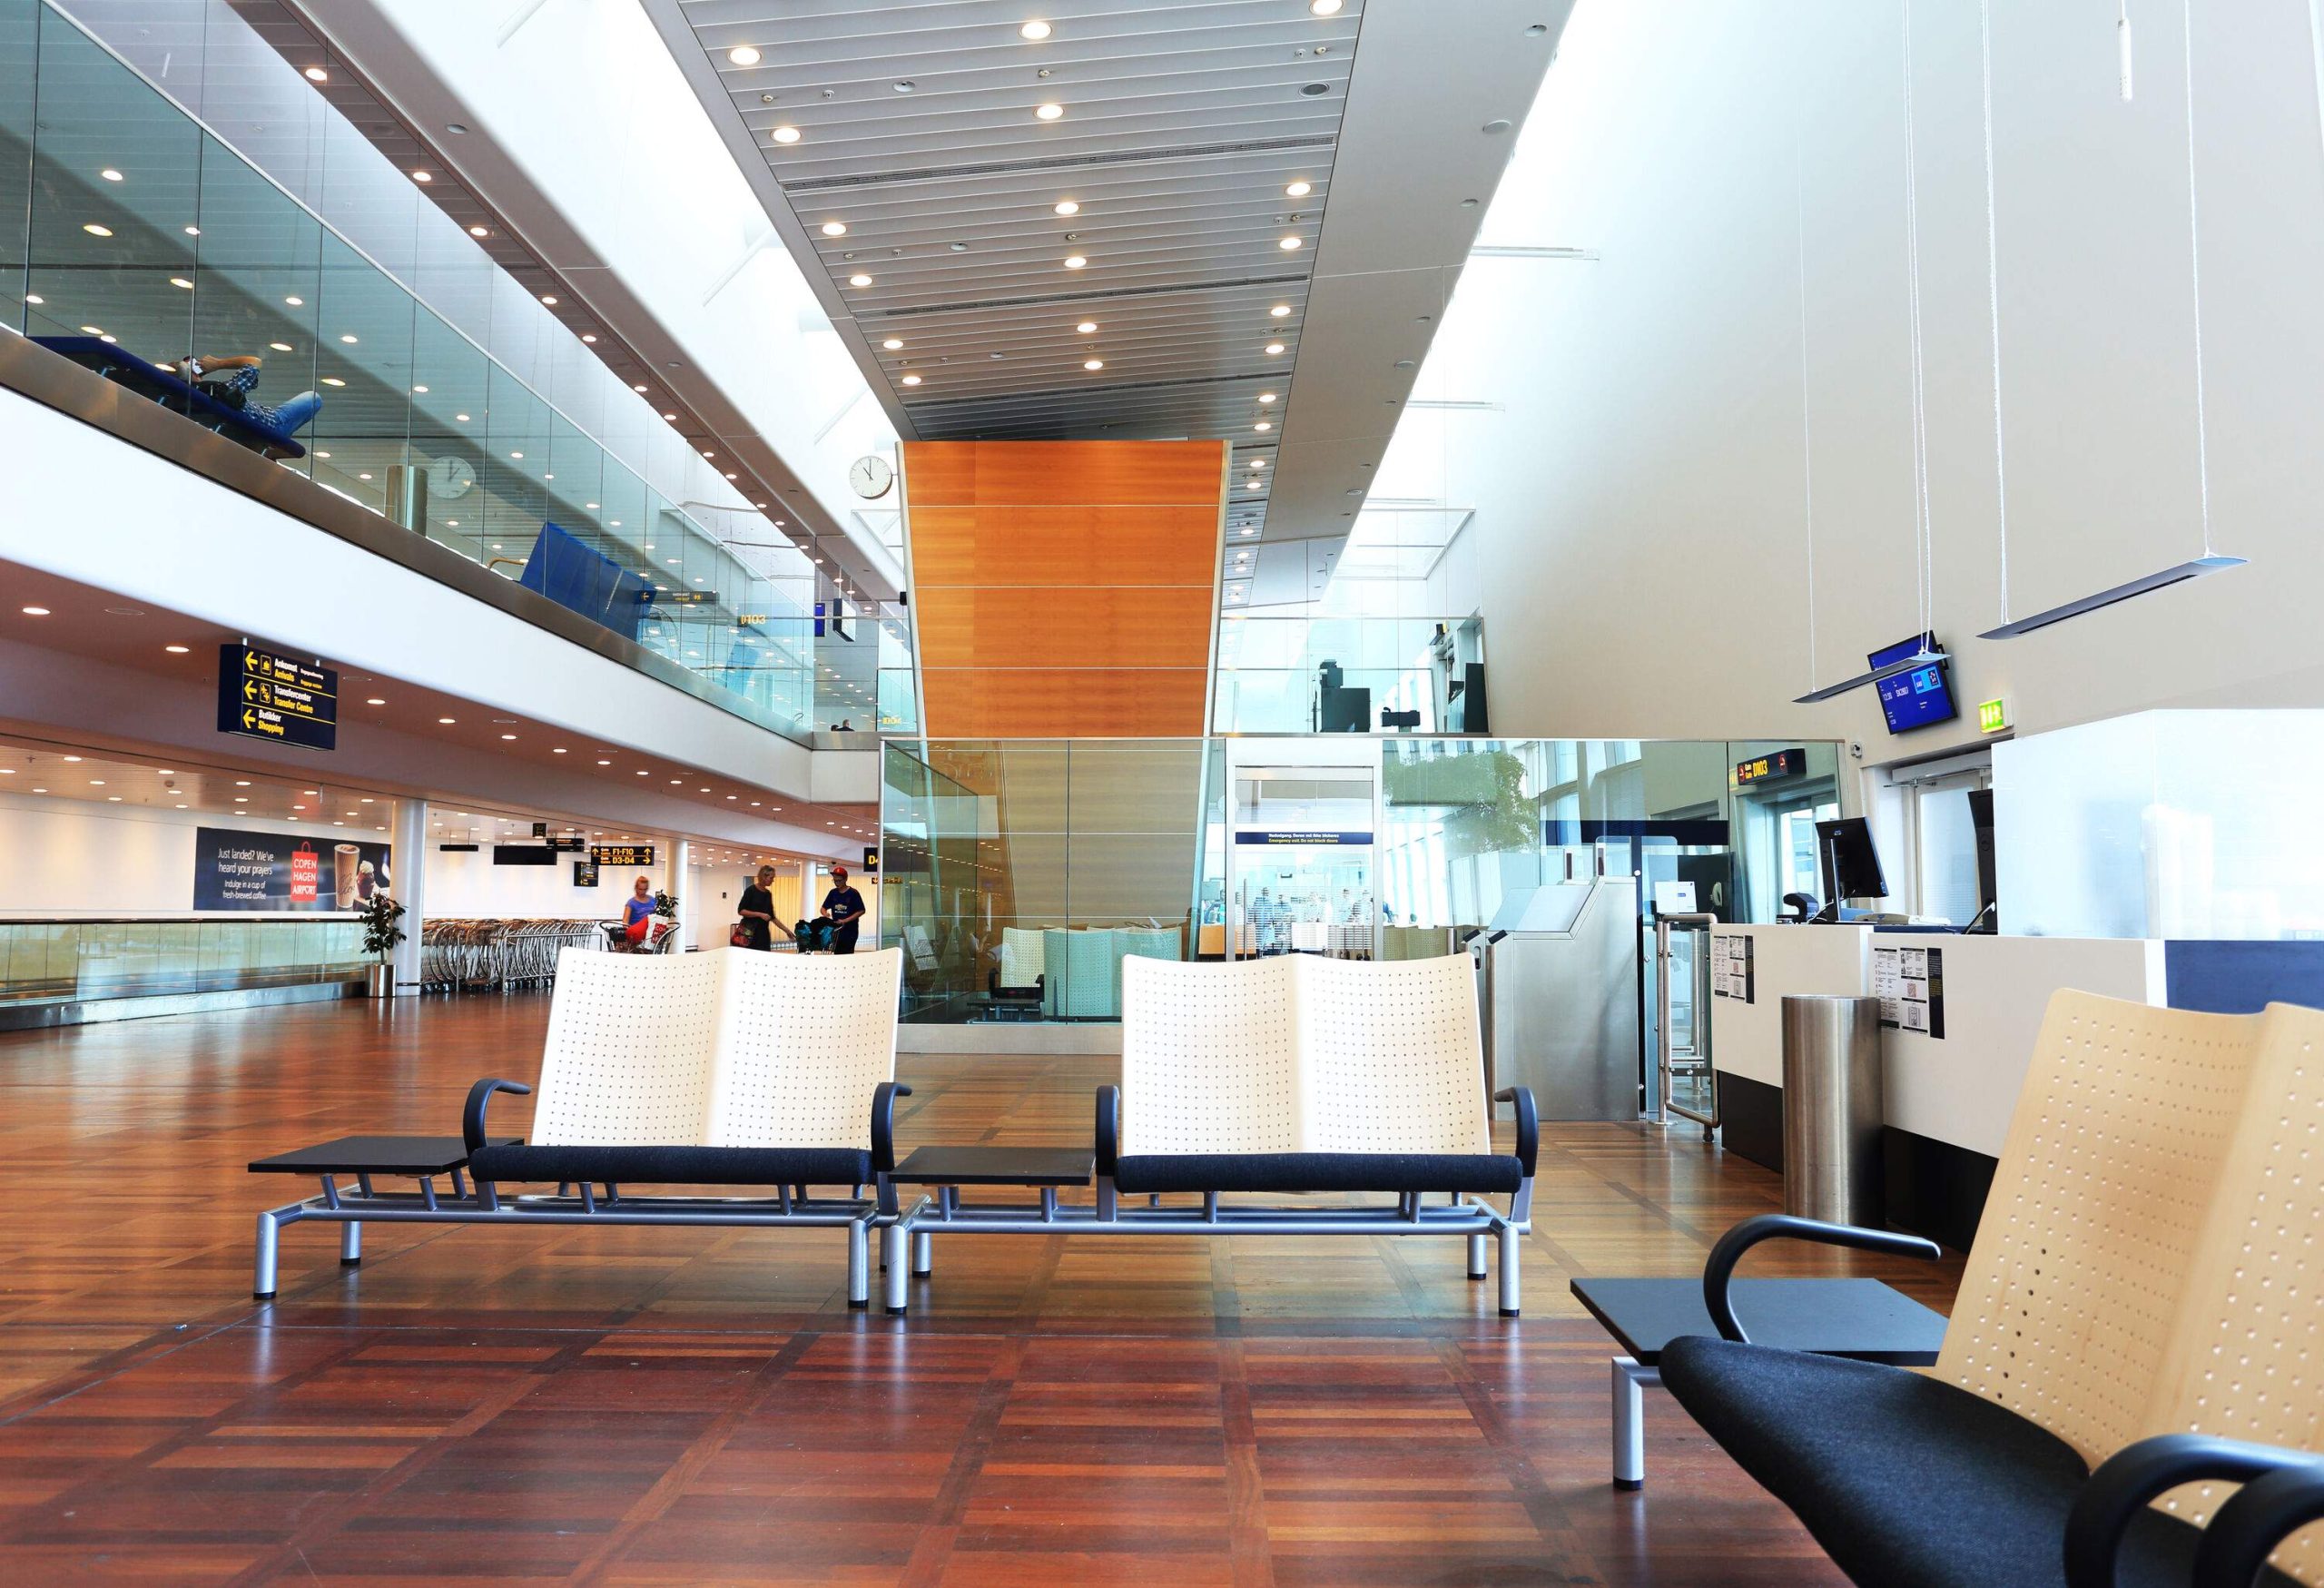 Benches with armrests and side tables on a tidy waiting hall in a brightly lighted airport.